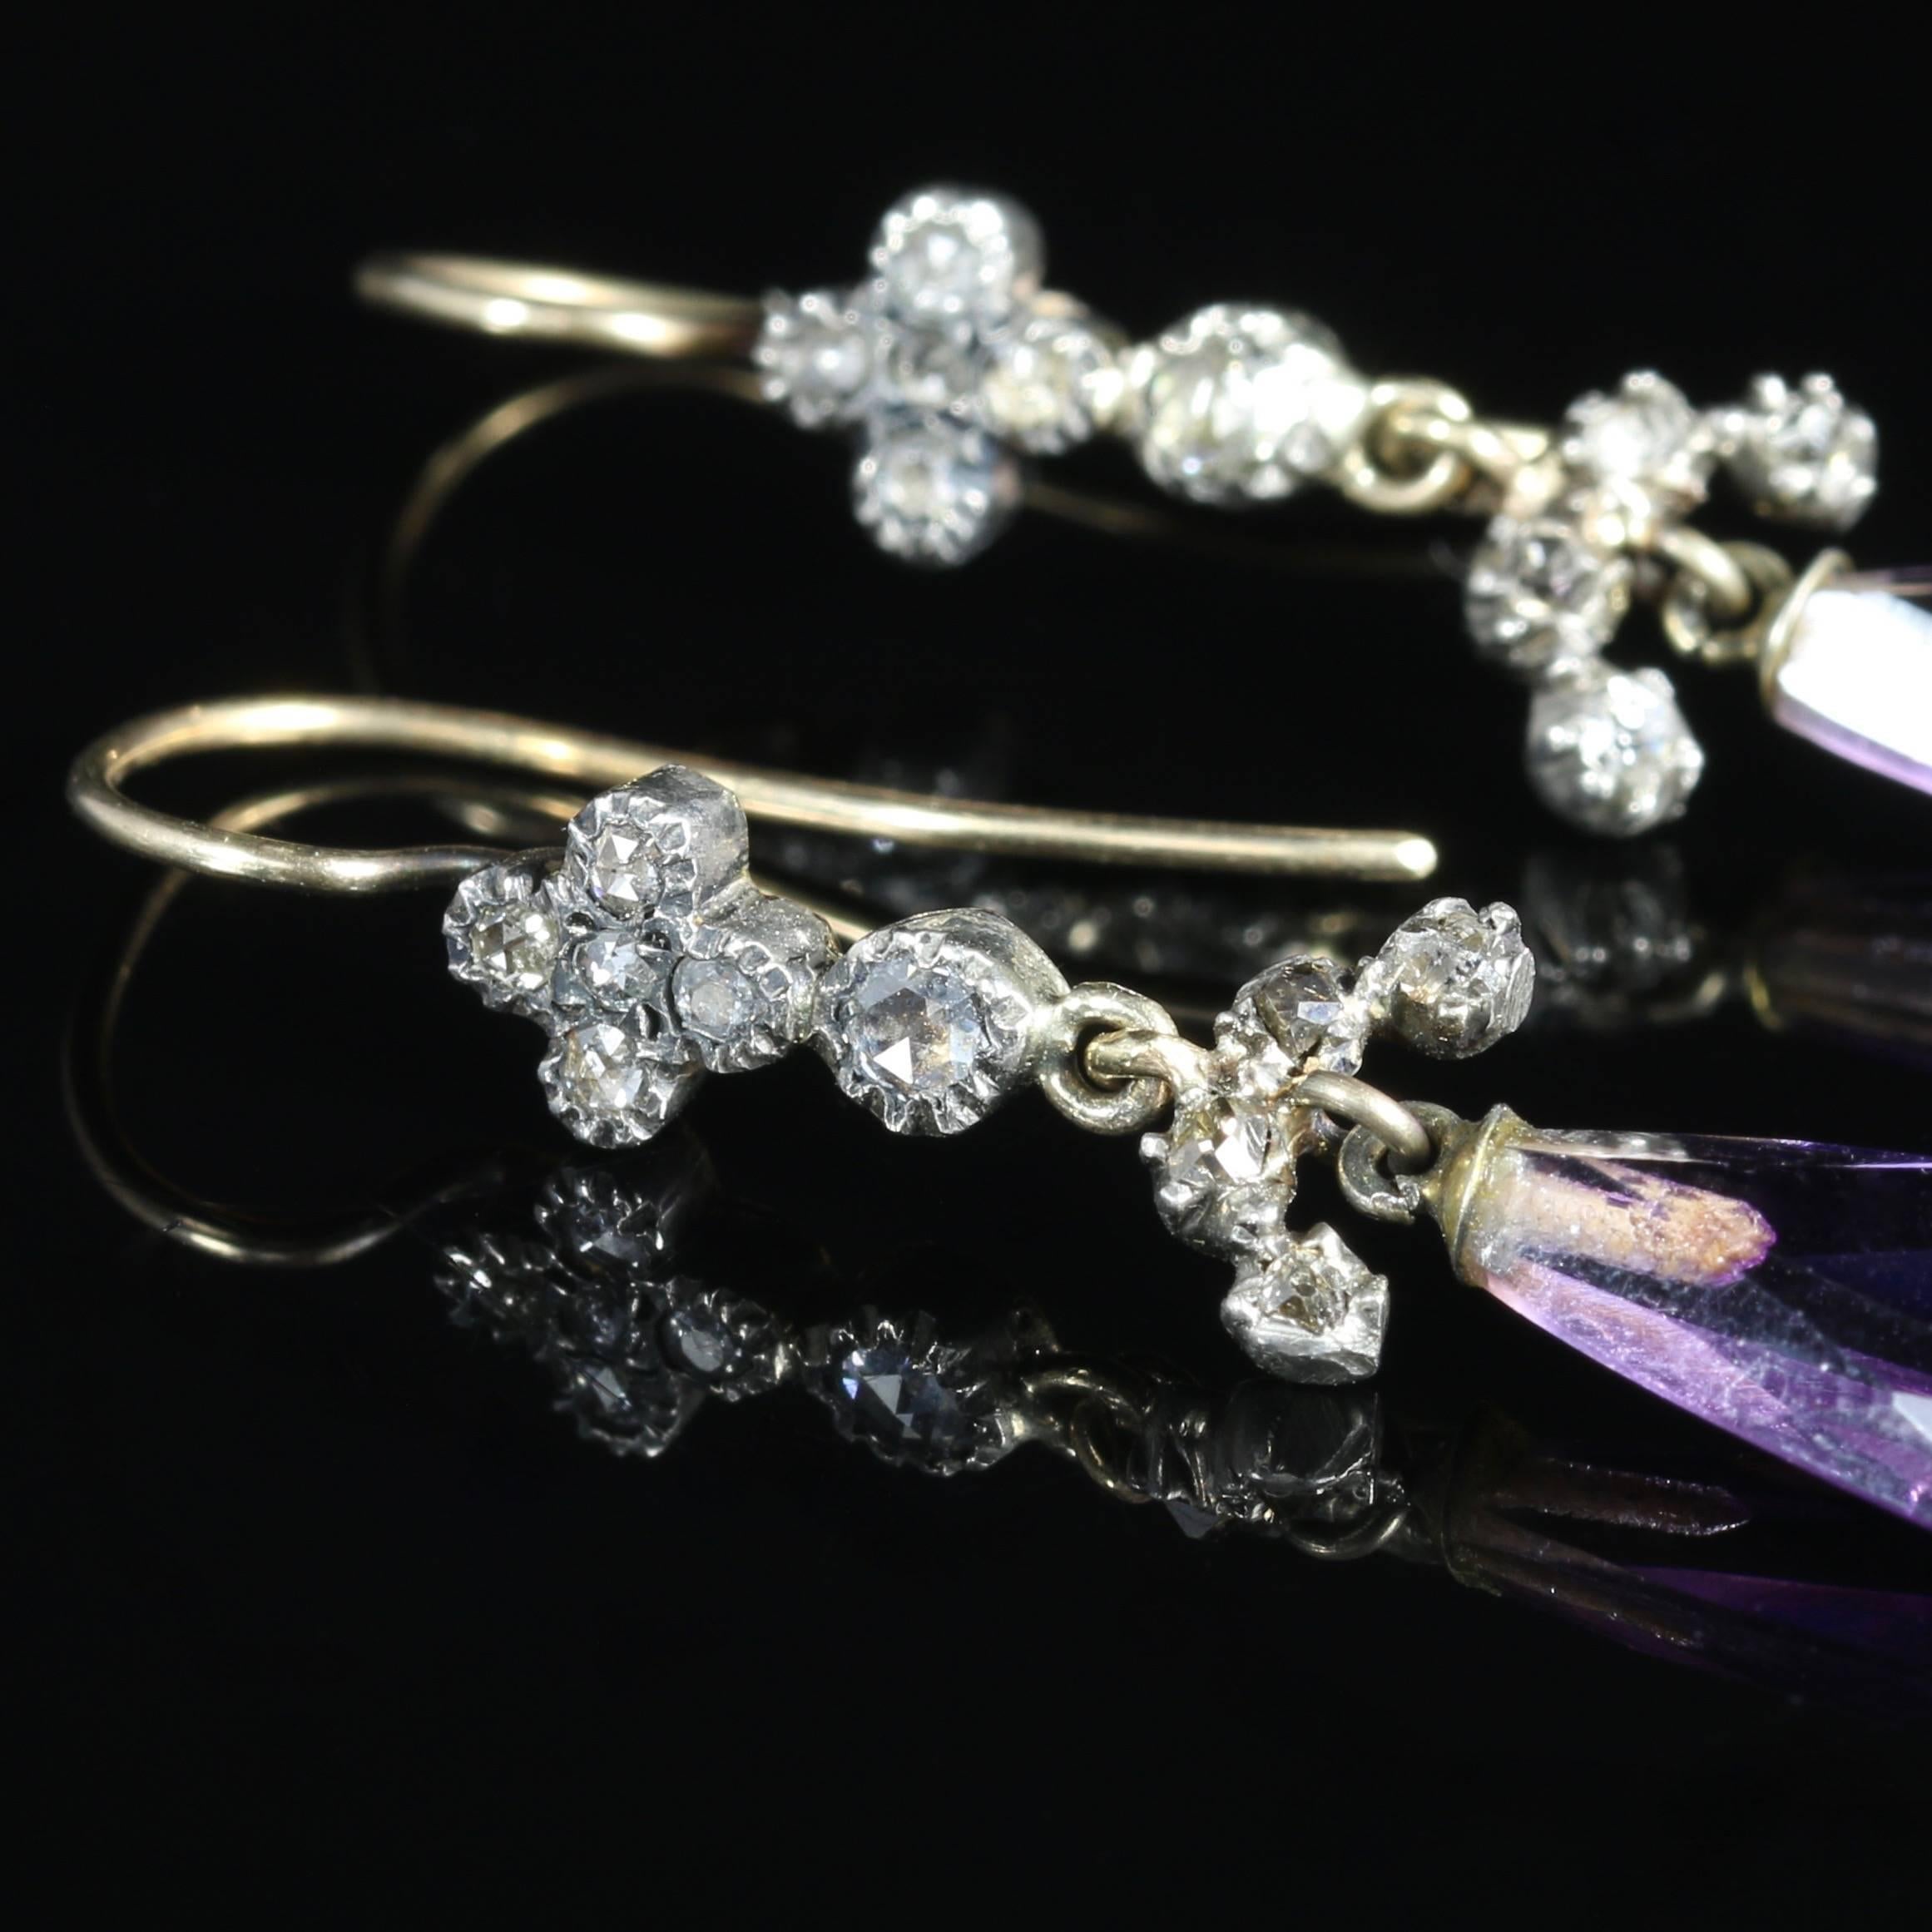 Antique Victorian Amethyst Diamond Earrings 18 Carat Gold, circa 1880 In Excellent Condition In Lancaster, Lancashire